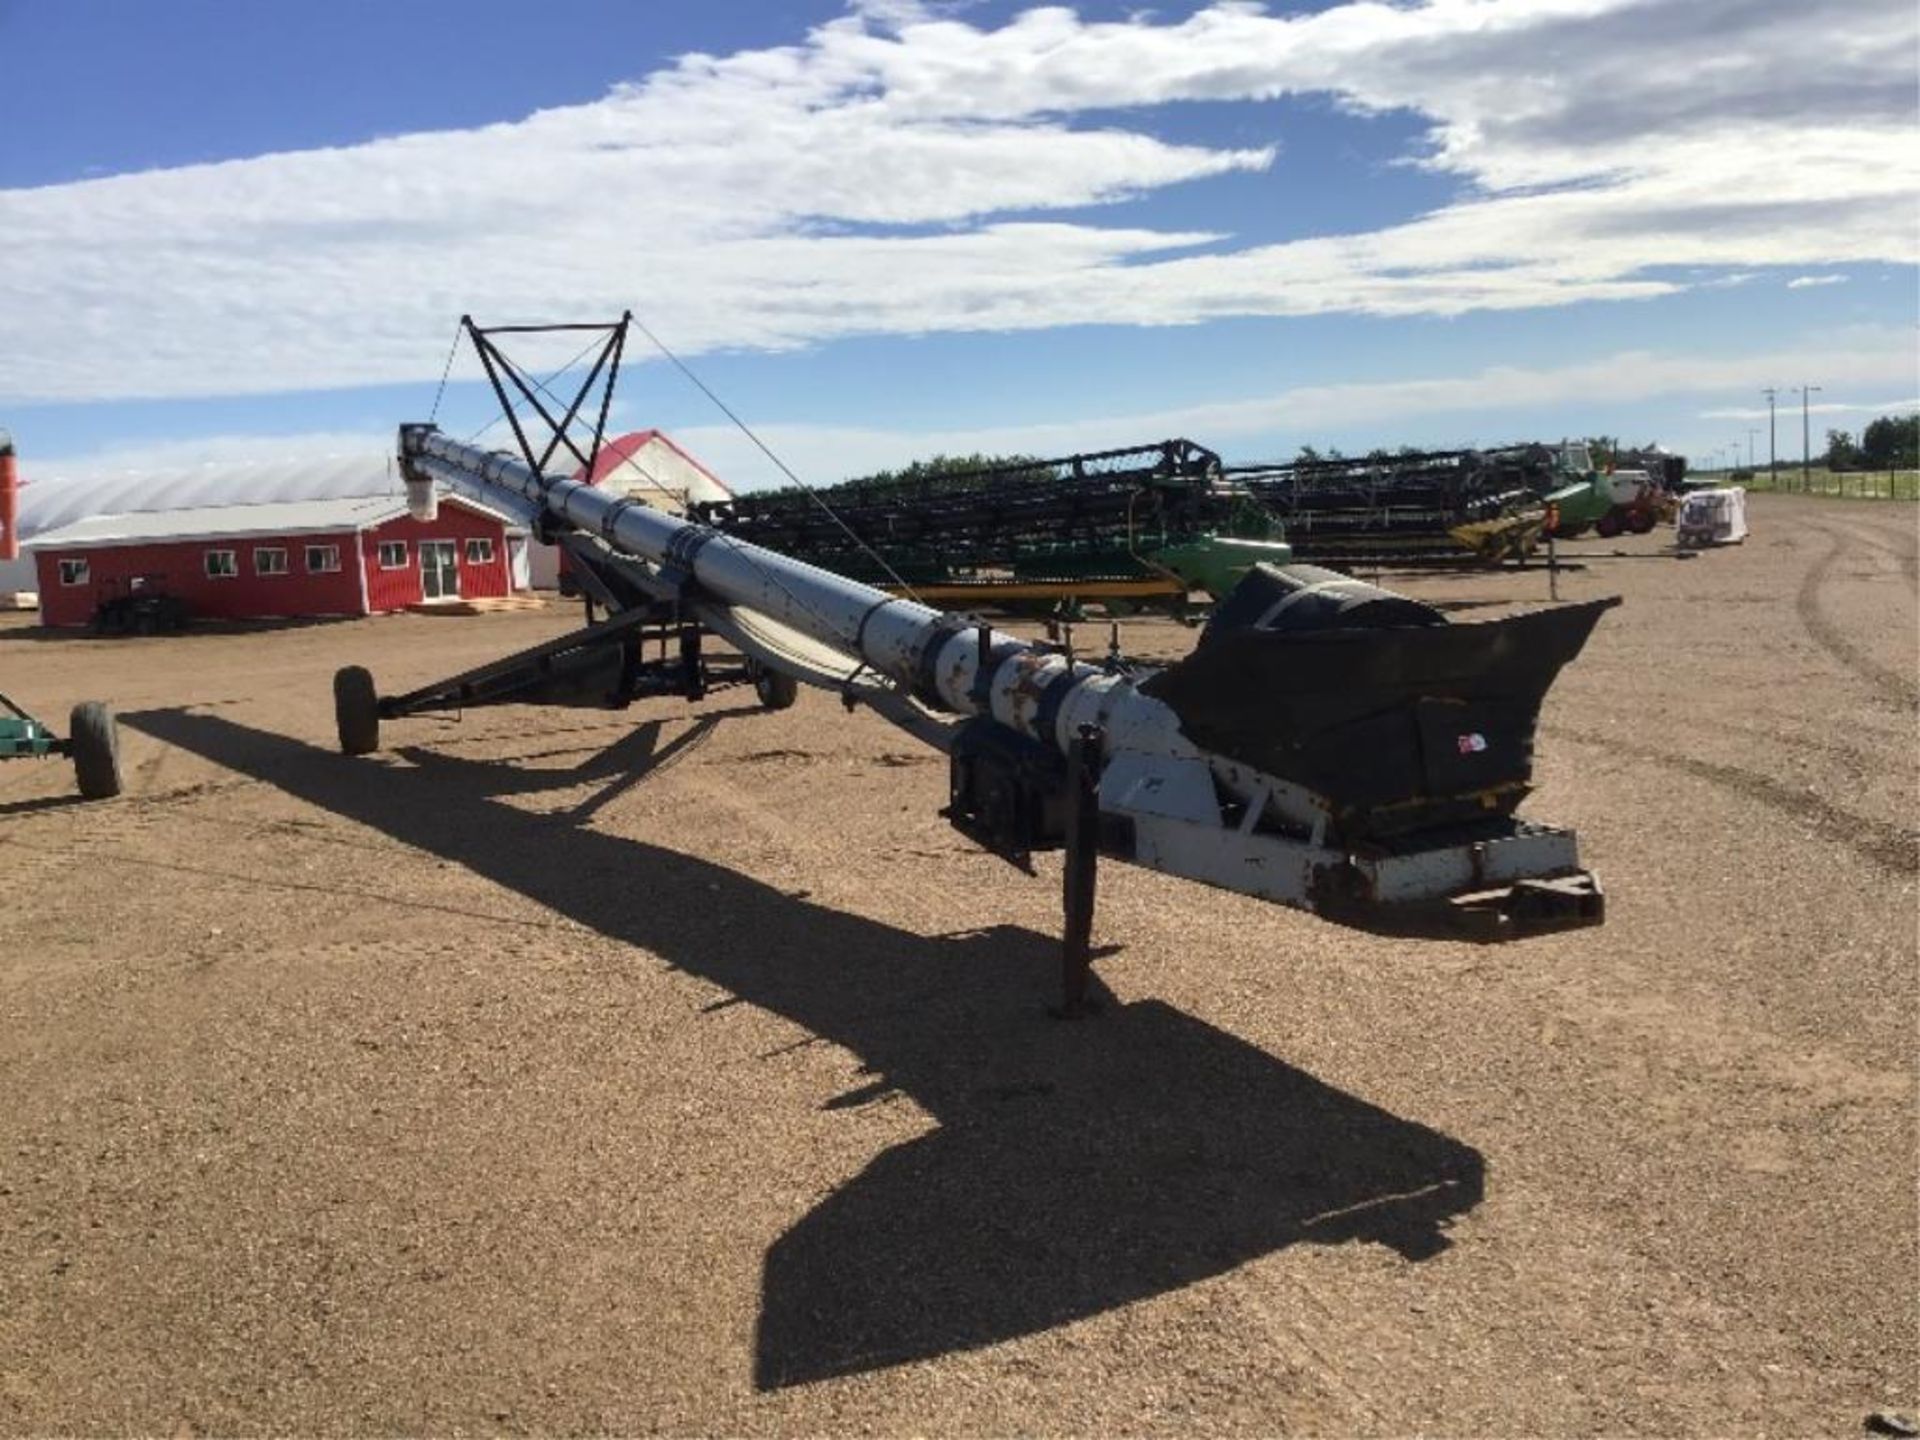 Convey All 14 X 65Ft PTO Drive Grain Conveyor s/n 7897874 540PTO, c/w Brand New Belt valued at $3,